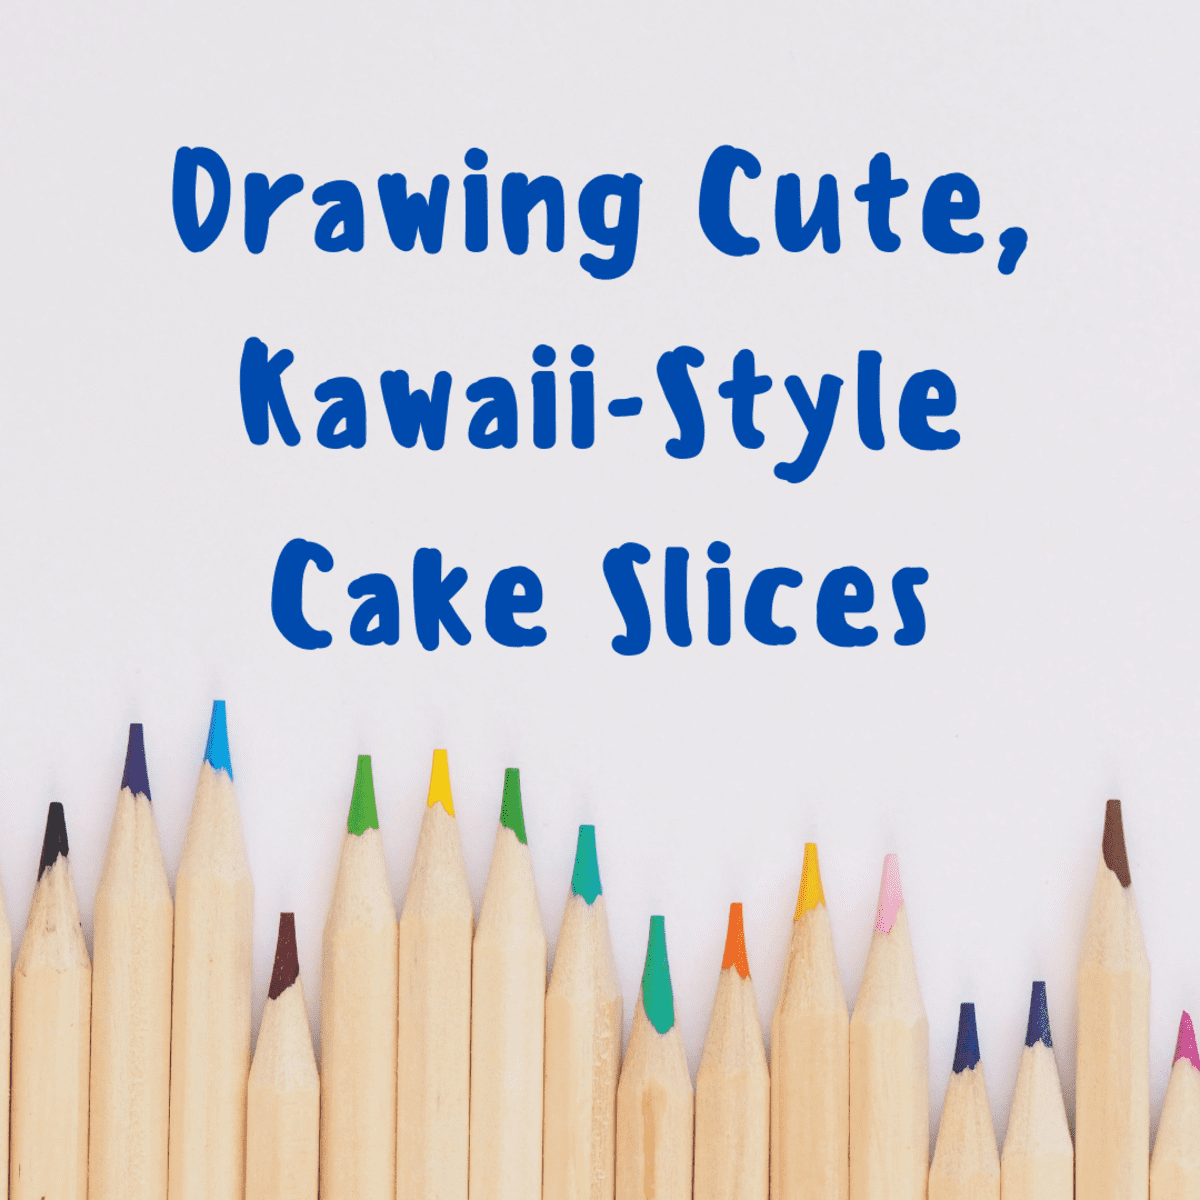 How To Draw Kawaii Cute Pie  Drawing to draw - Drawing to Draw 